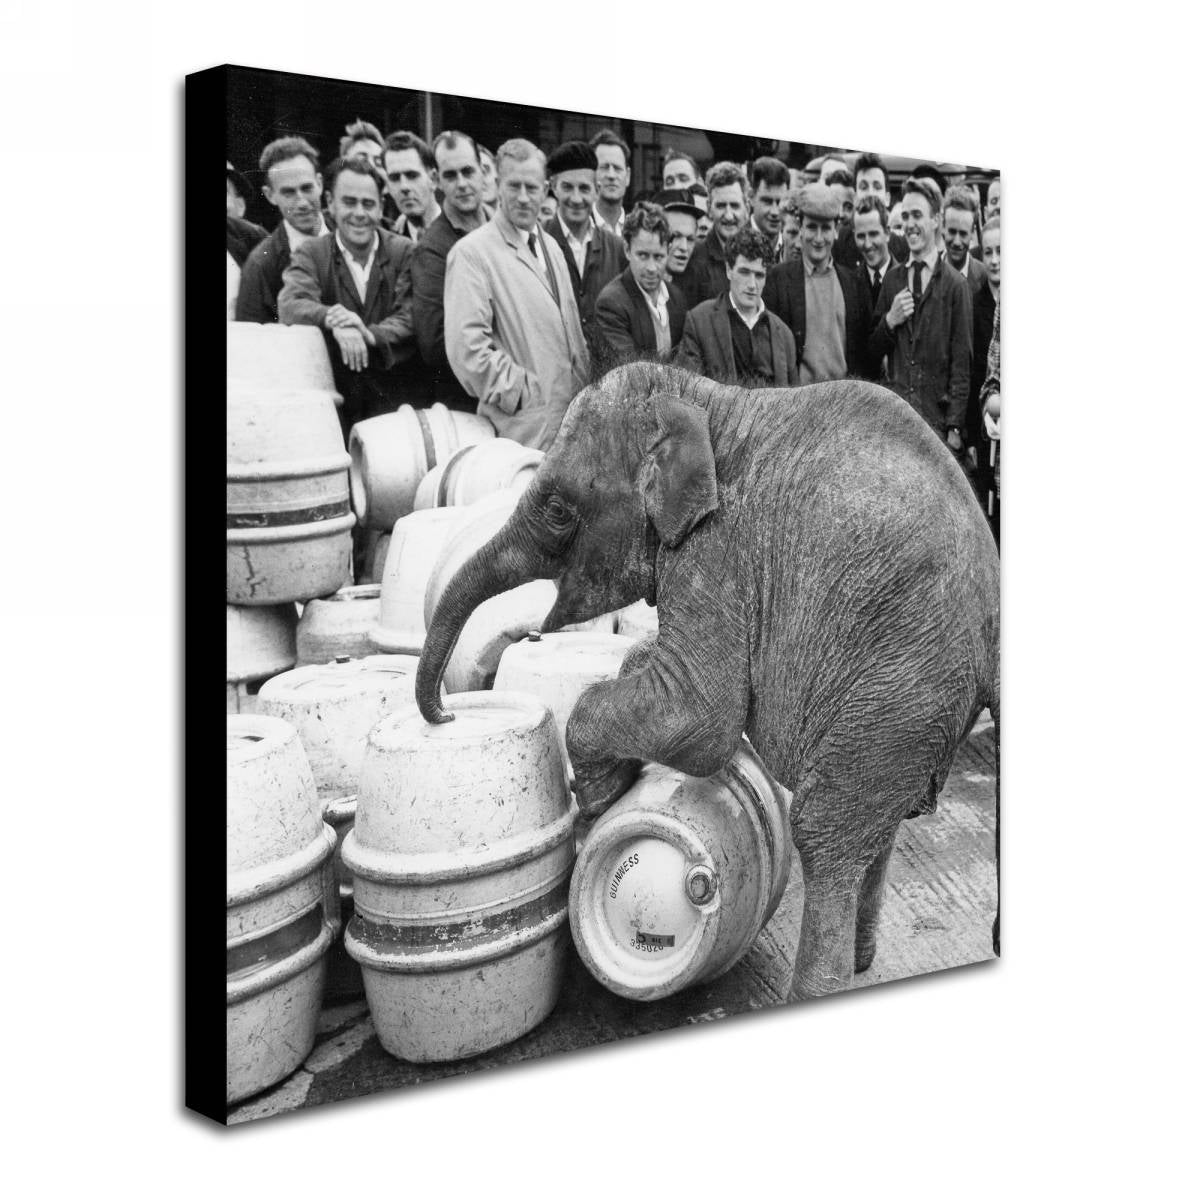 A black and white photo of an elephant in front of a group of people, suitable for Guinness Brewery 'Guinness XIX' Canvas Art.